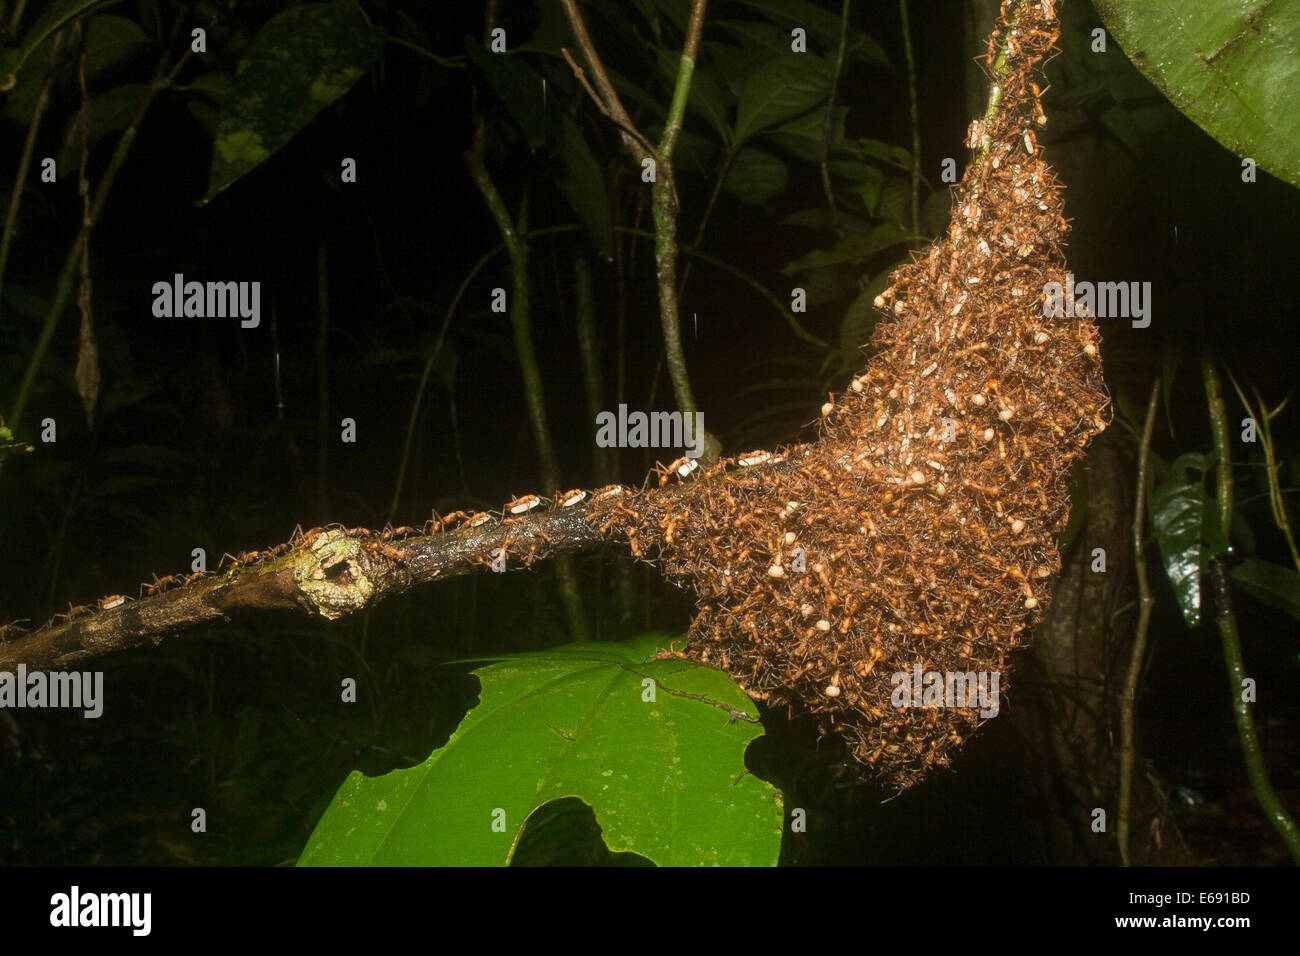 A spectacular example of an army ant bivouac (a temporary colony shelter constructed out of ants that are linked together). Stock Photo